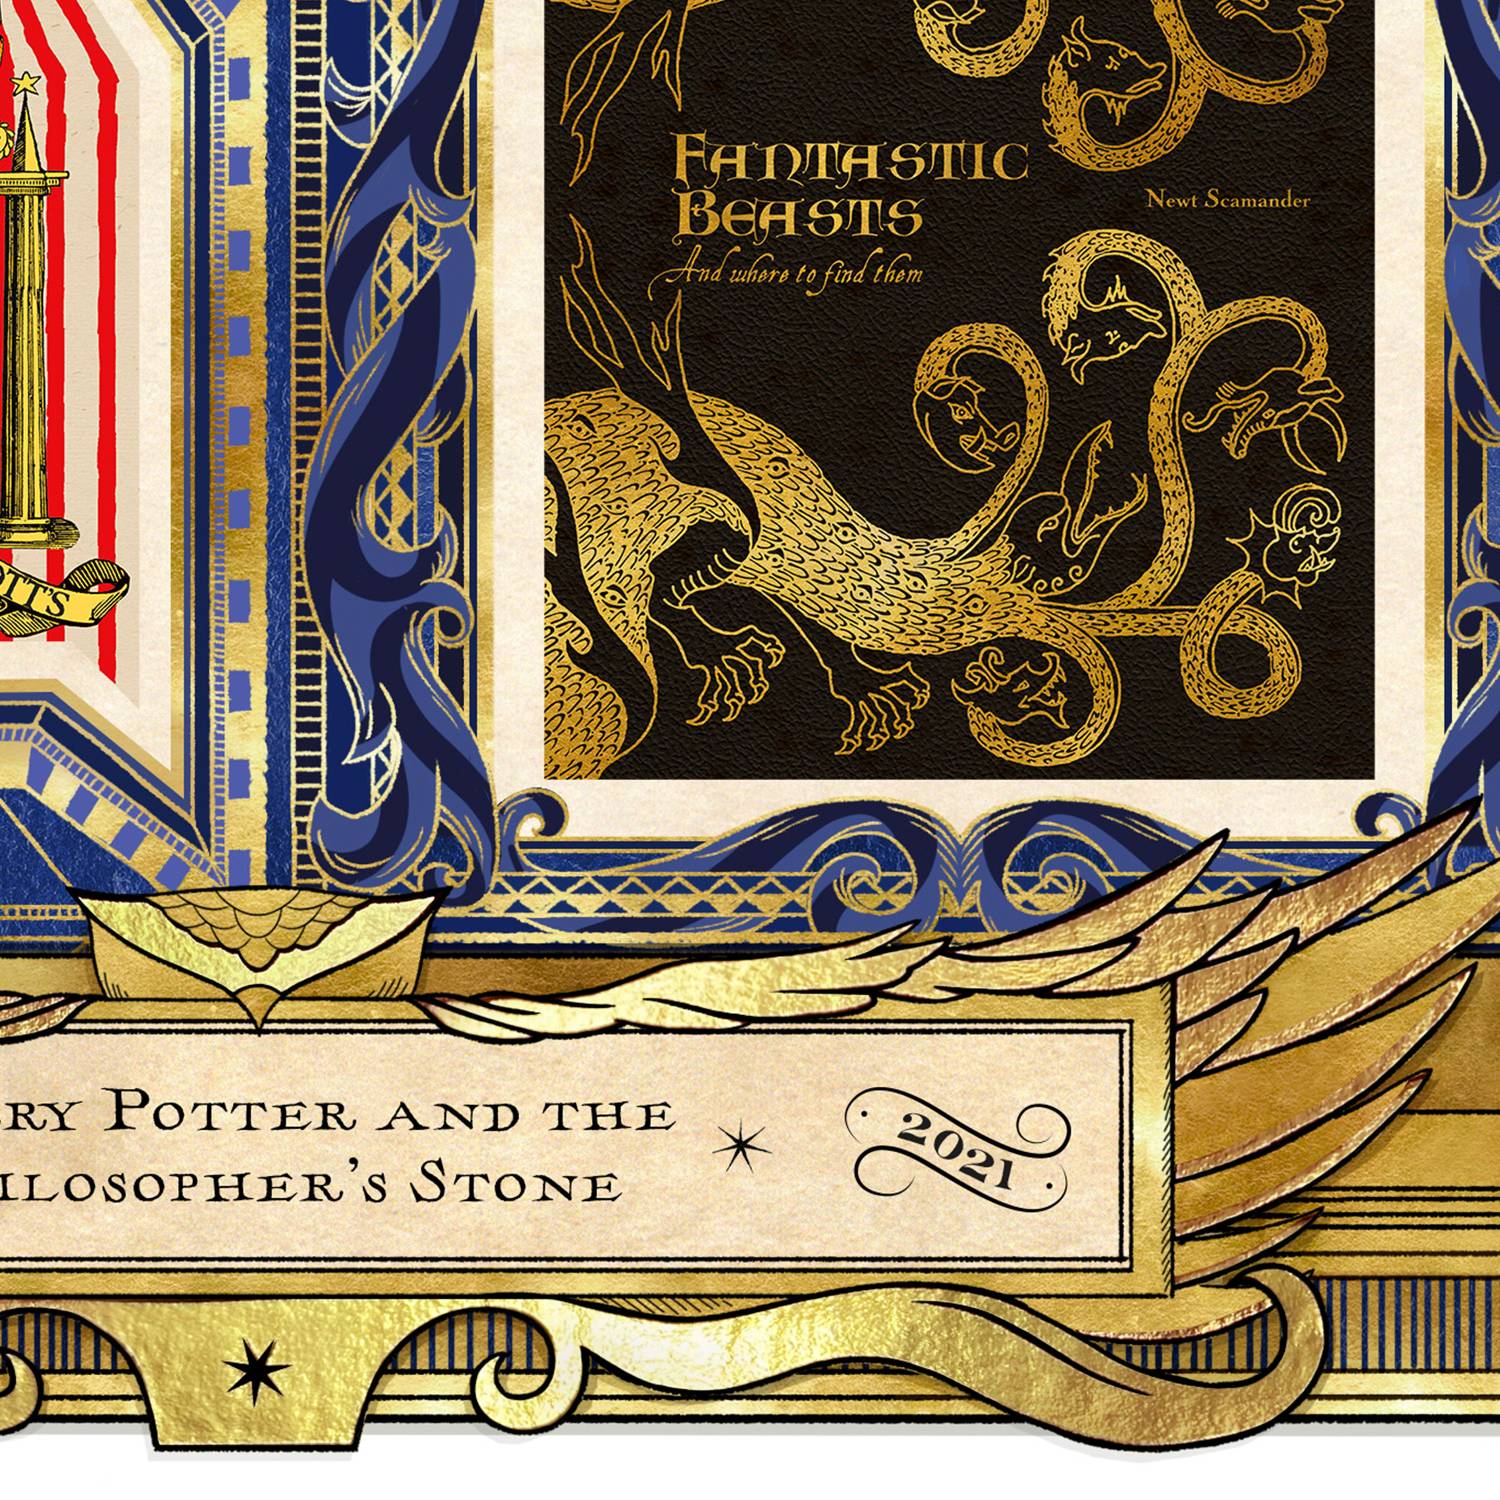 20 Years on Screen: Harry Potter and the Philosopher’s Stone - MinaLima